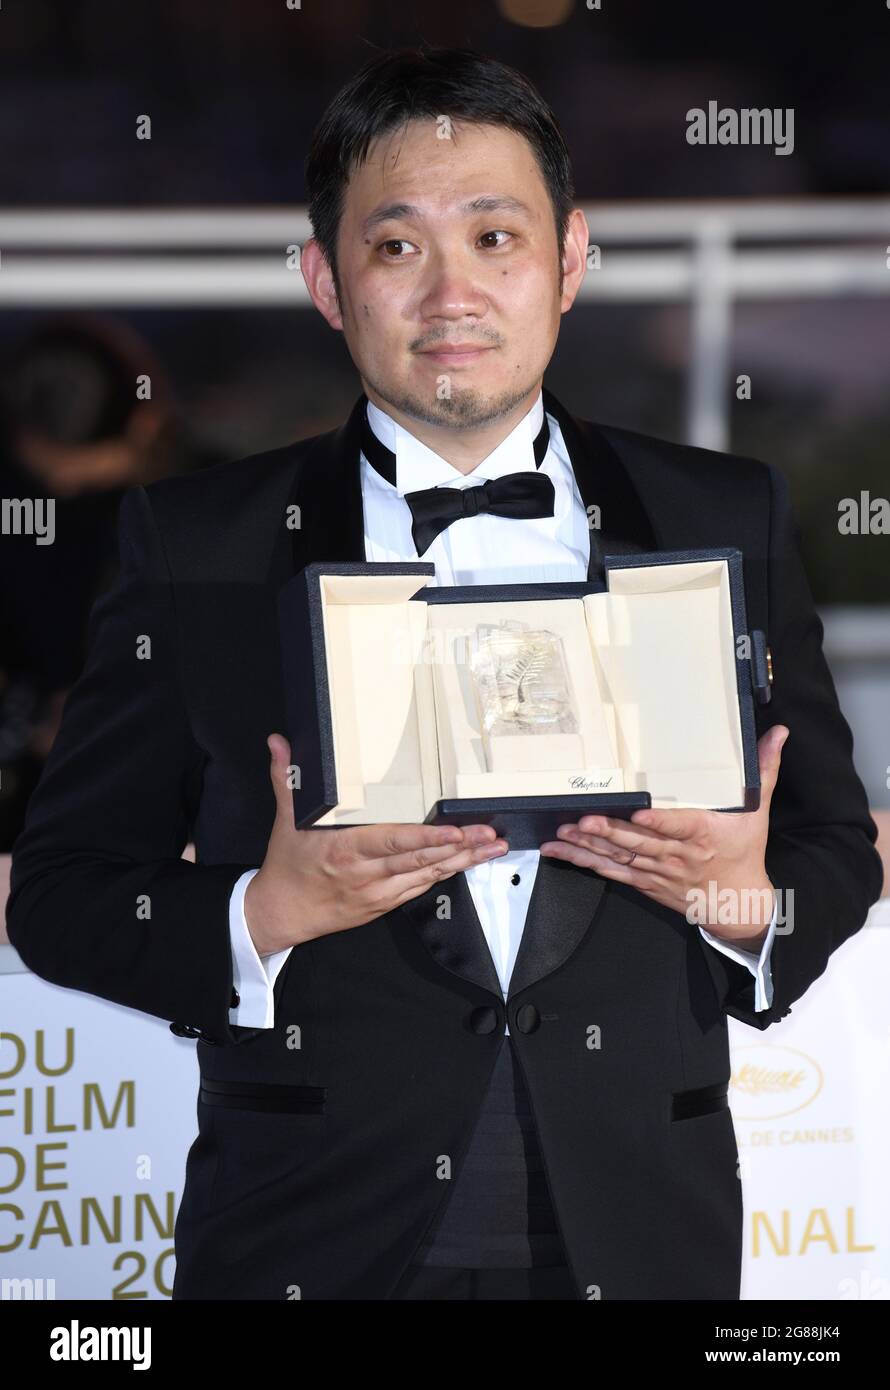 Cannes, France, 17 July 2021 Ryusuke Hamaguchi, Best Screenplay Prize for Drive My Car attending the Winners photocall, held at the Palais des Festival. Part of the 74th Cannes Film Festival. Credit: Doug Peters/EMPICS/Alamy Live News Stock Photo